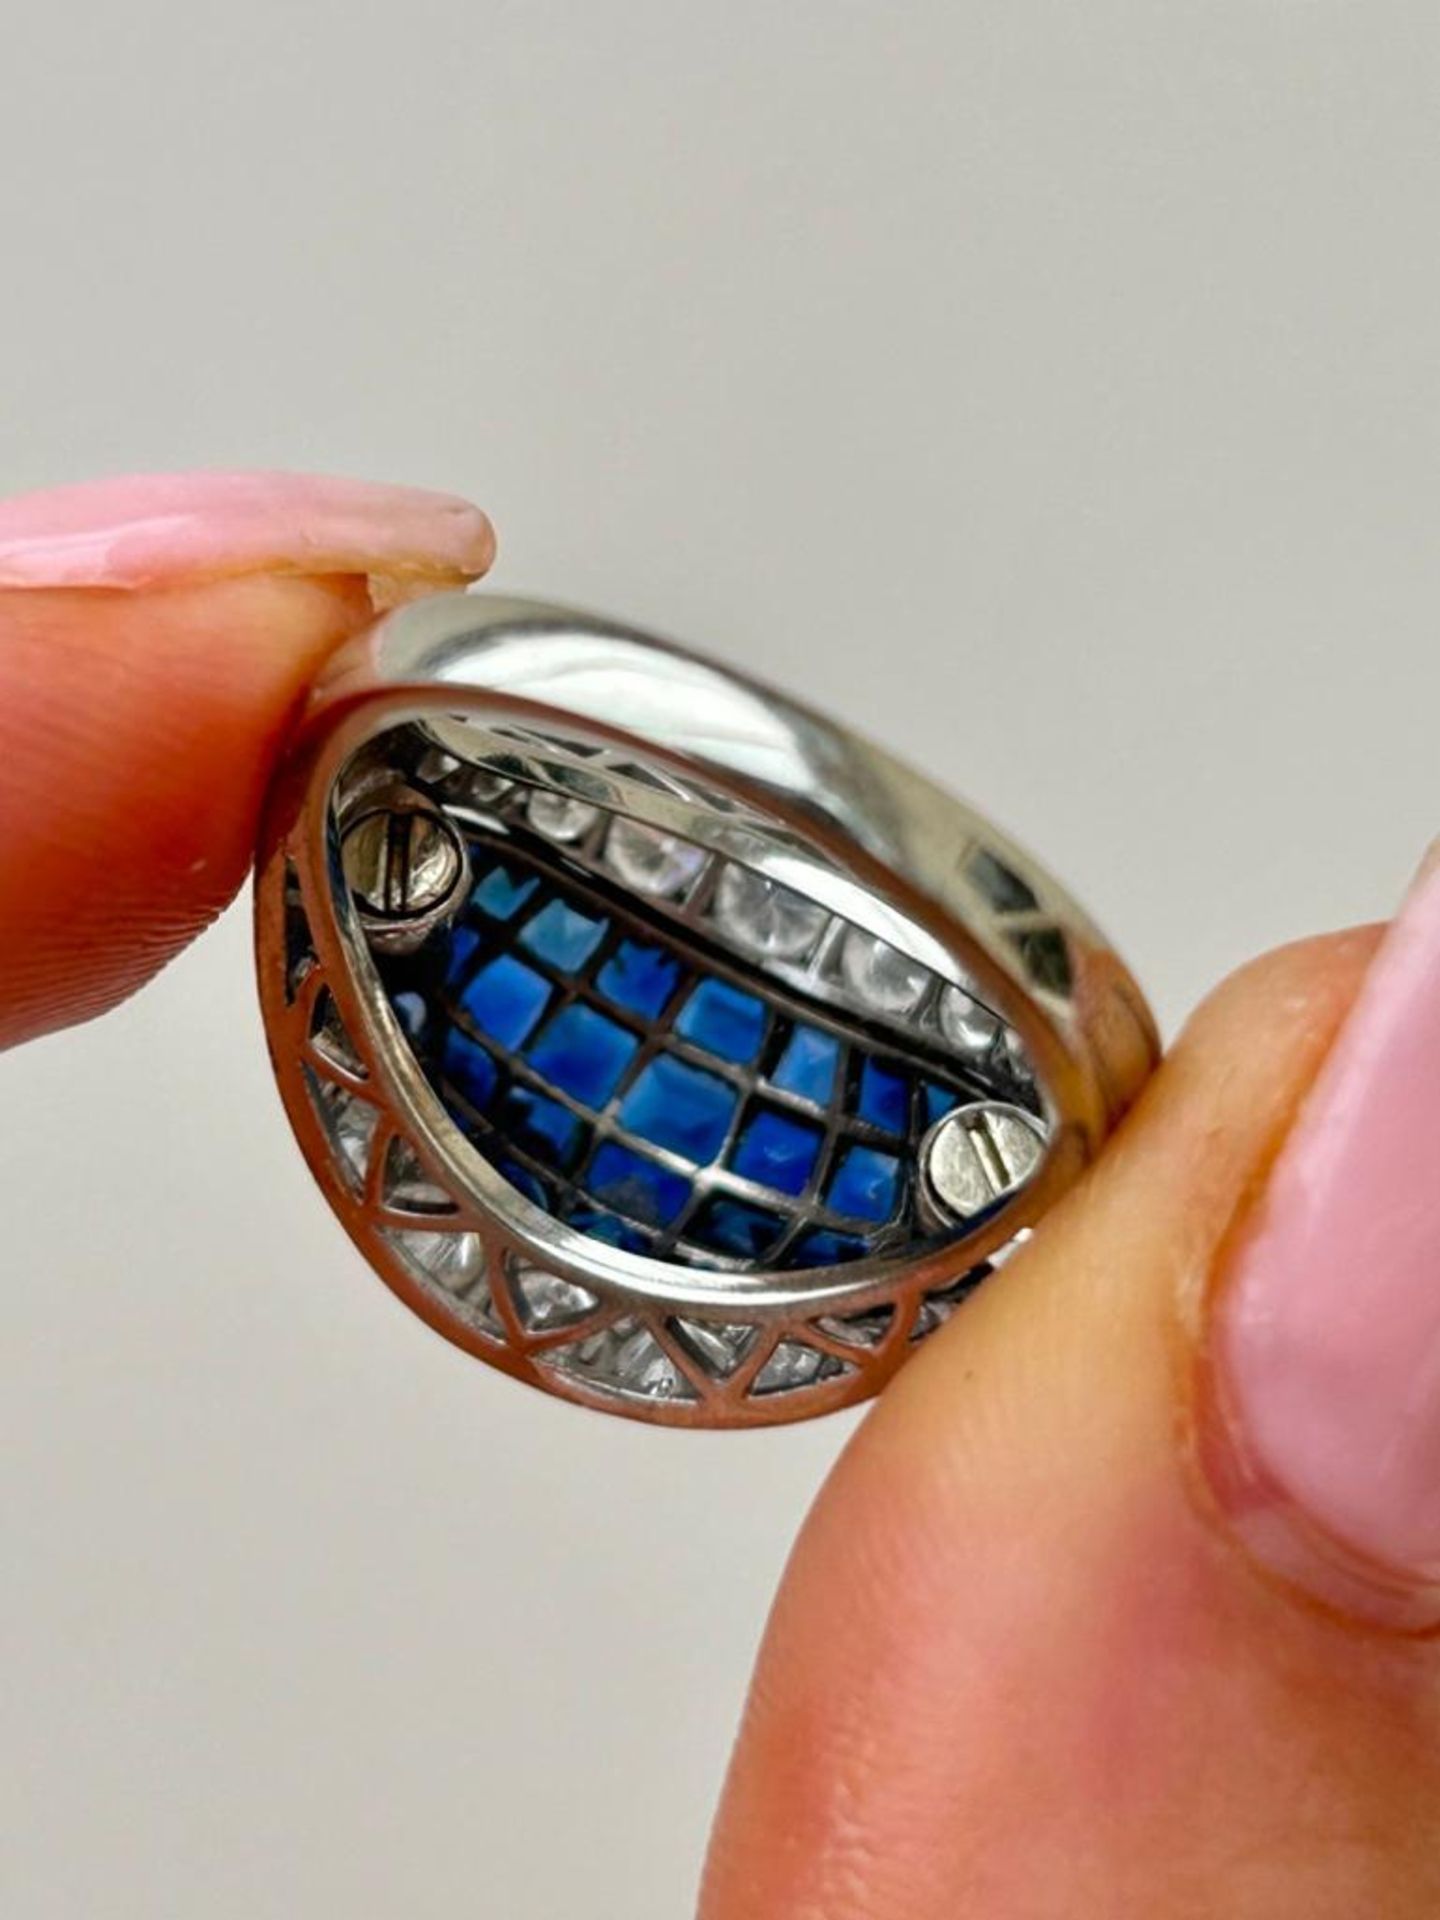 1940s Sapphire and Diamond “Schilling” Cocktail Ring in 18ct White Gold - Image 7 of 9